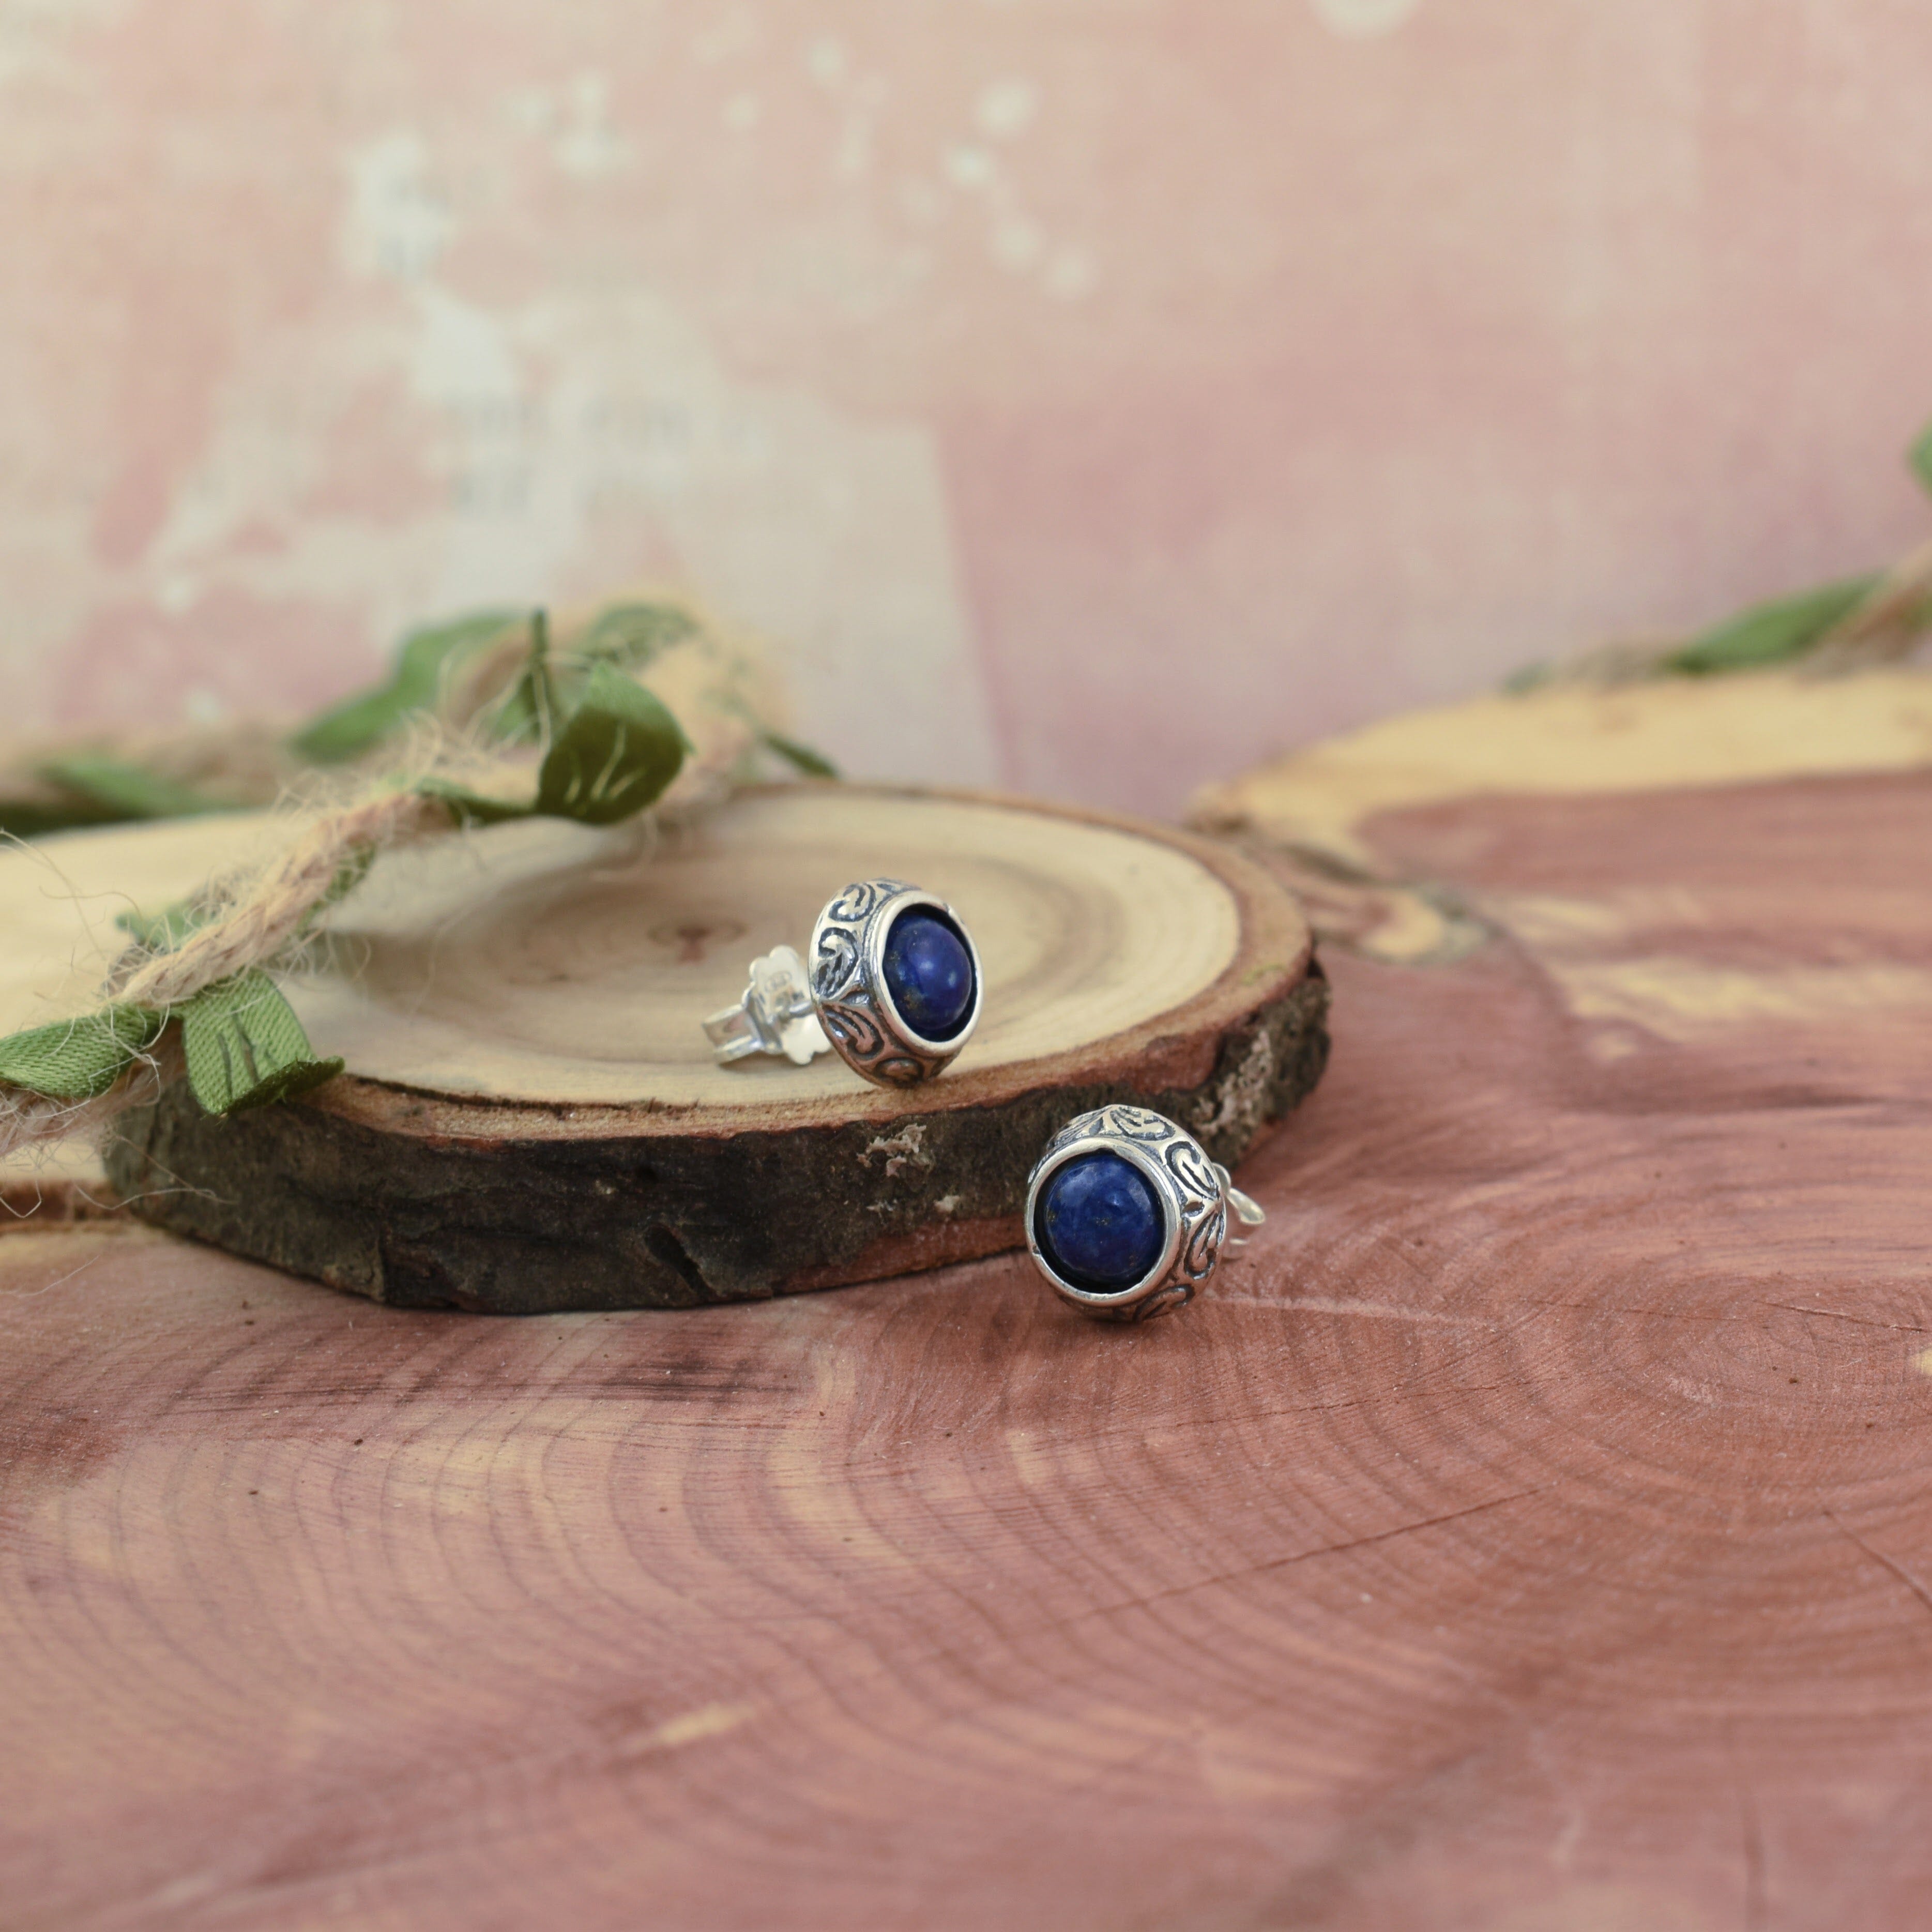 .925 sterling silver and blue lapis stud earrings